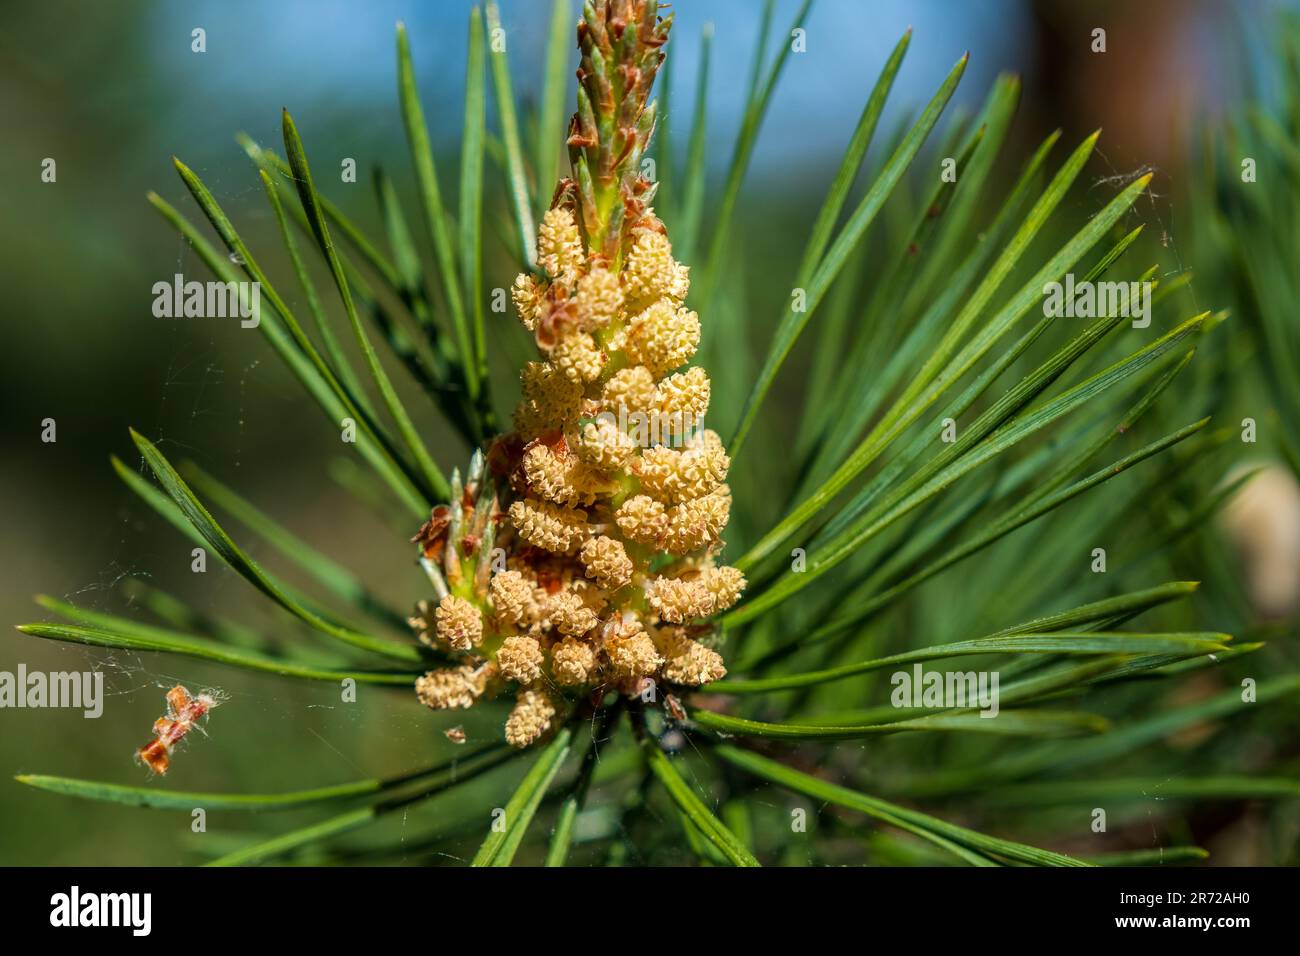 European spruce with young buds, flowers and young cones. Stock Photo